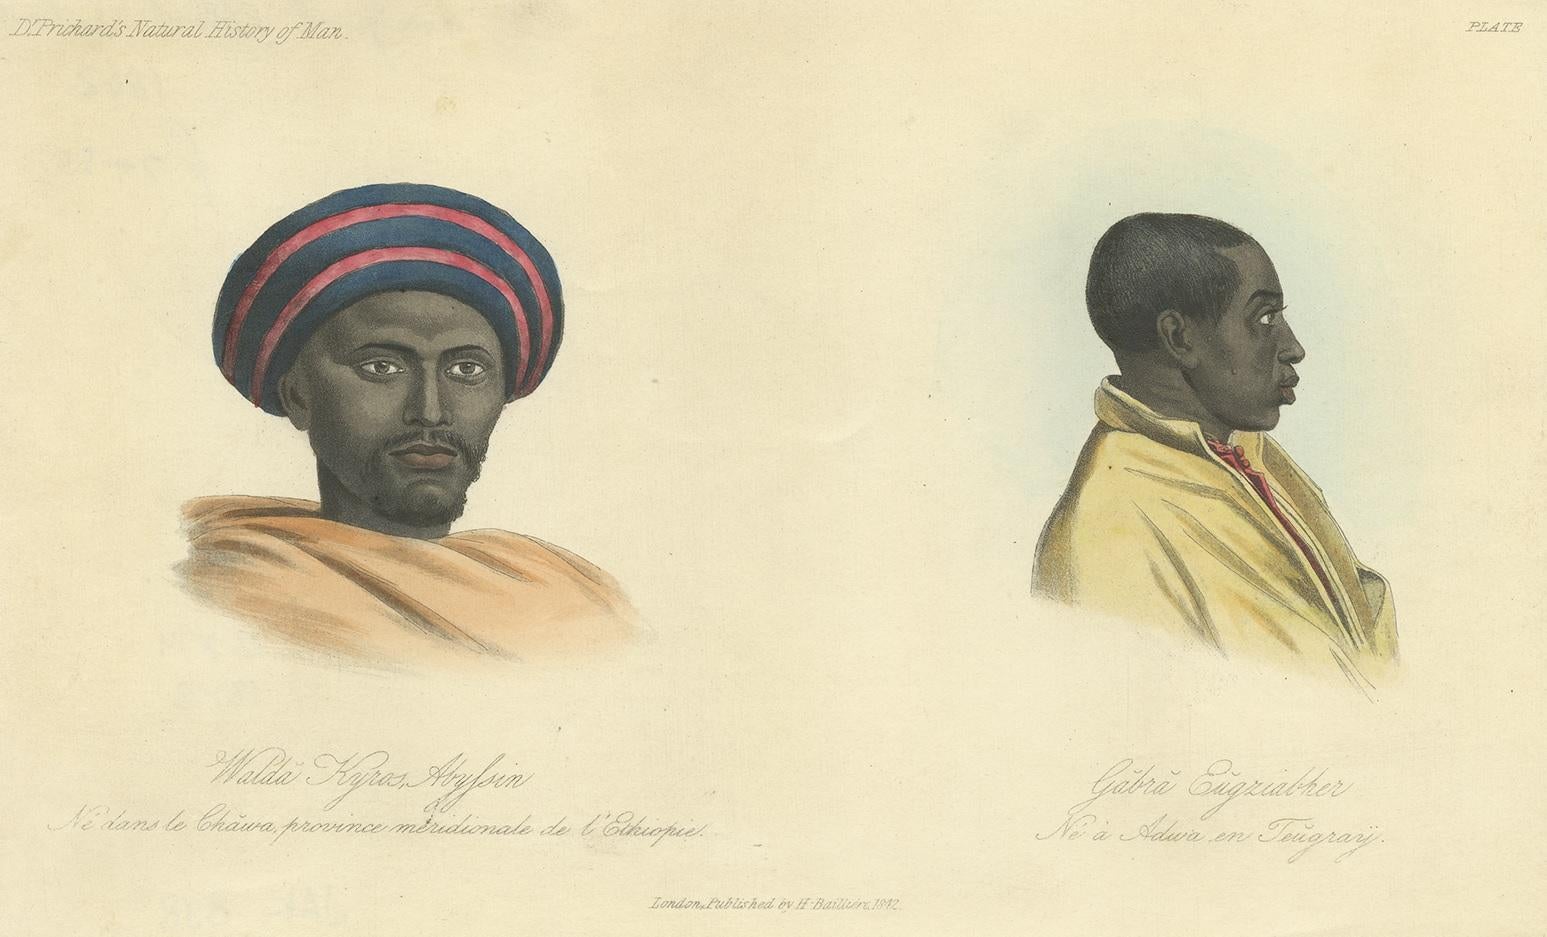 Antique print titled 'Walda Kyros Abyssin - Gabra Eugziabher'. Fine print of Walda Kyros, an Abyssinian, and Gabra Eugziabher, a native of Adowa. This print originates from 'Natural History of Man' by J.C. Prichard. A wonderful series of portraits